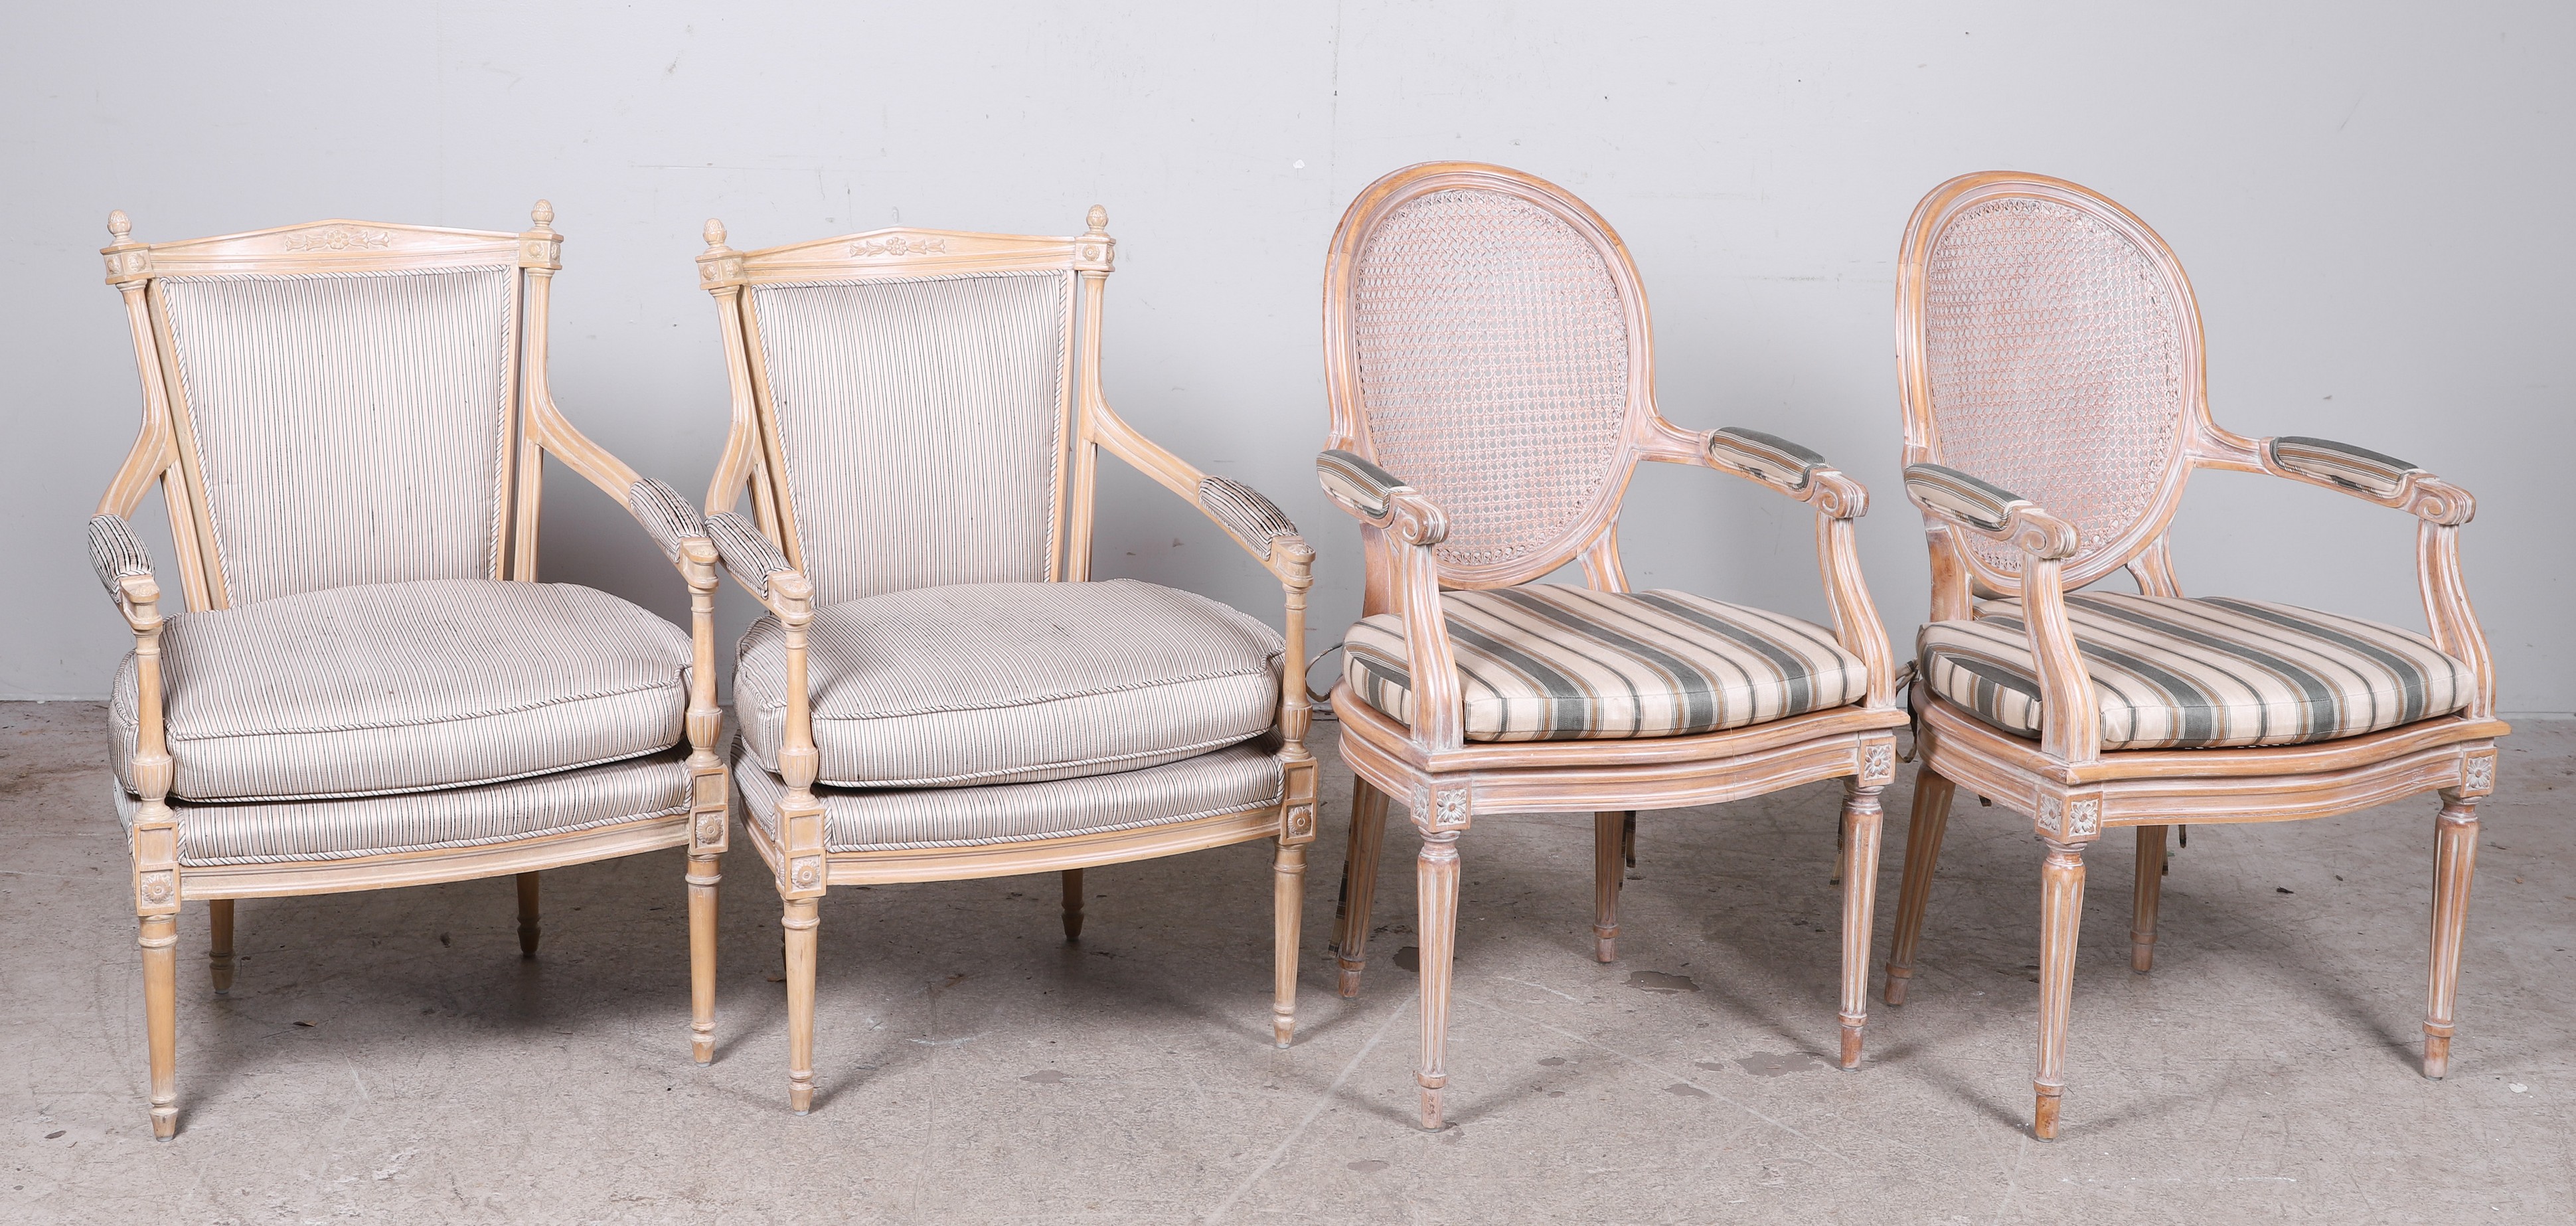  2 Pairs of Louis XVI Style Fauteuils  3b4471